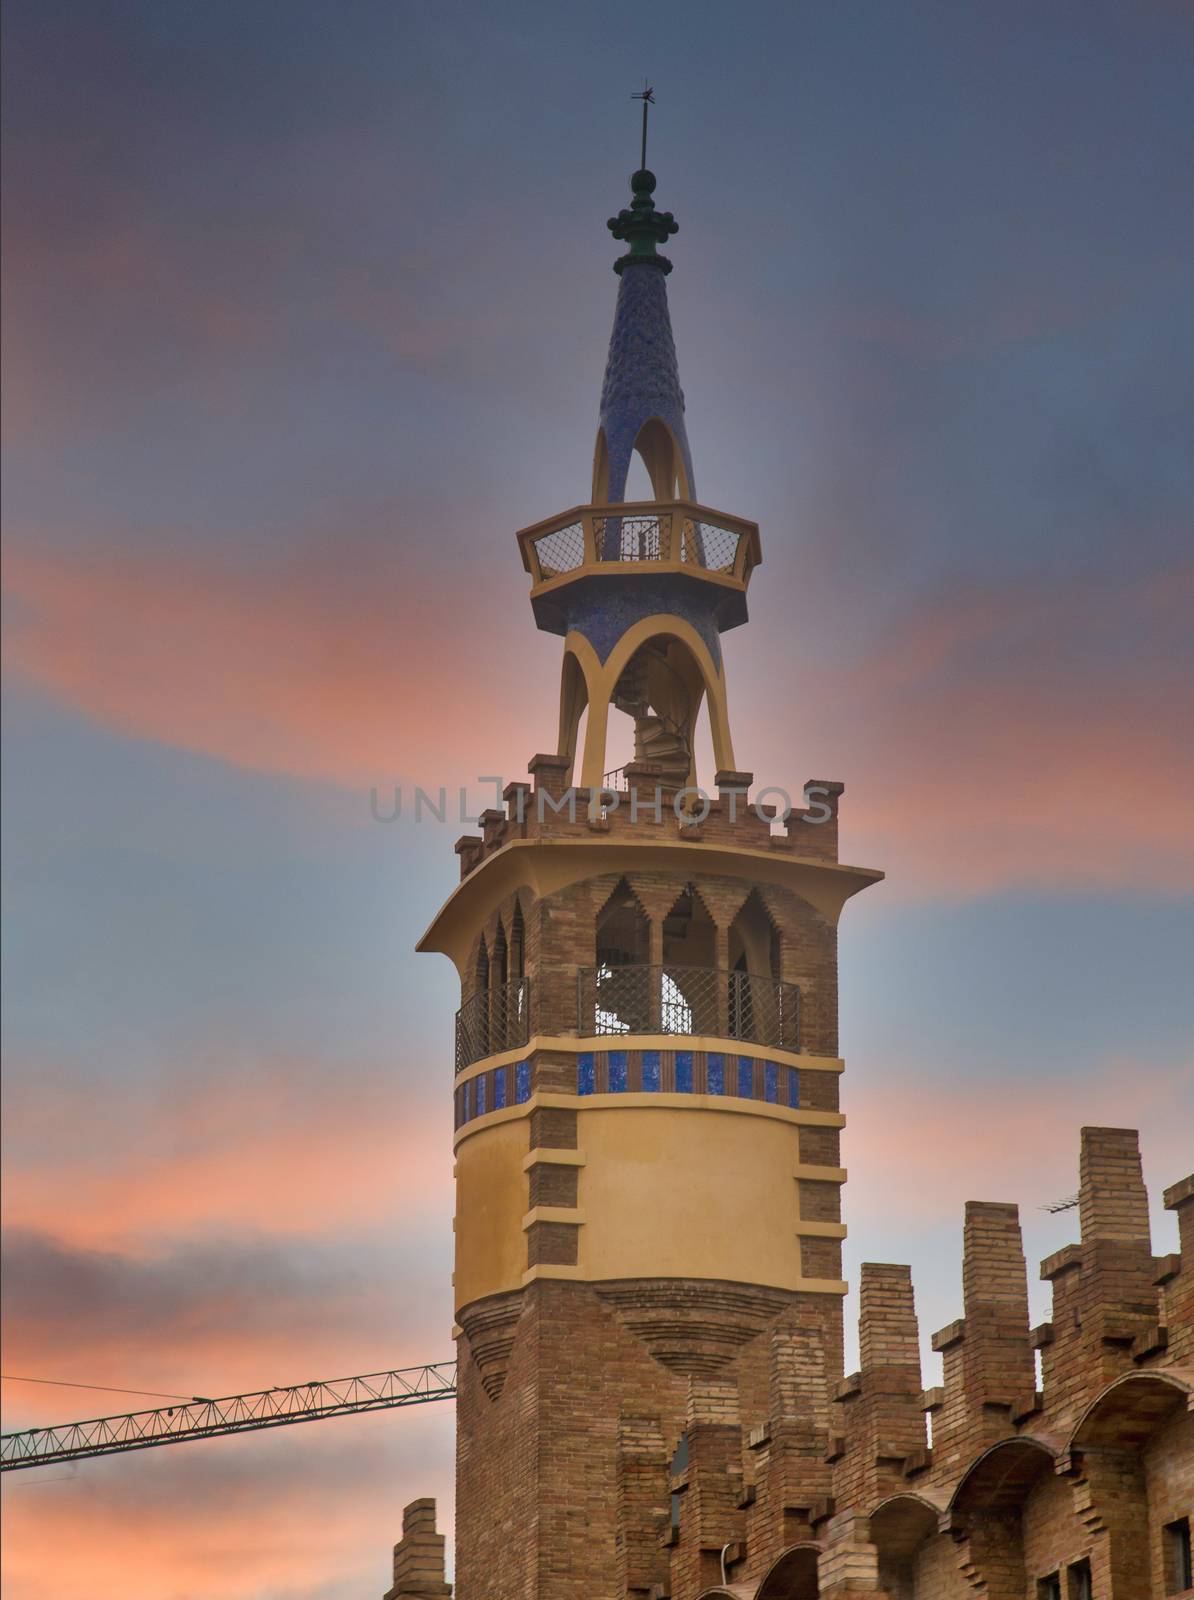 A church bell tower in Barcelona, Spain with blue tiles in the Gaudi style